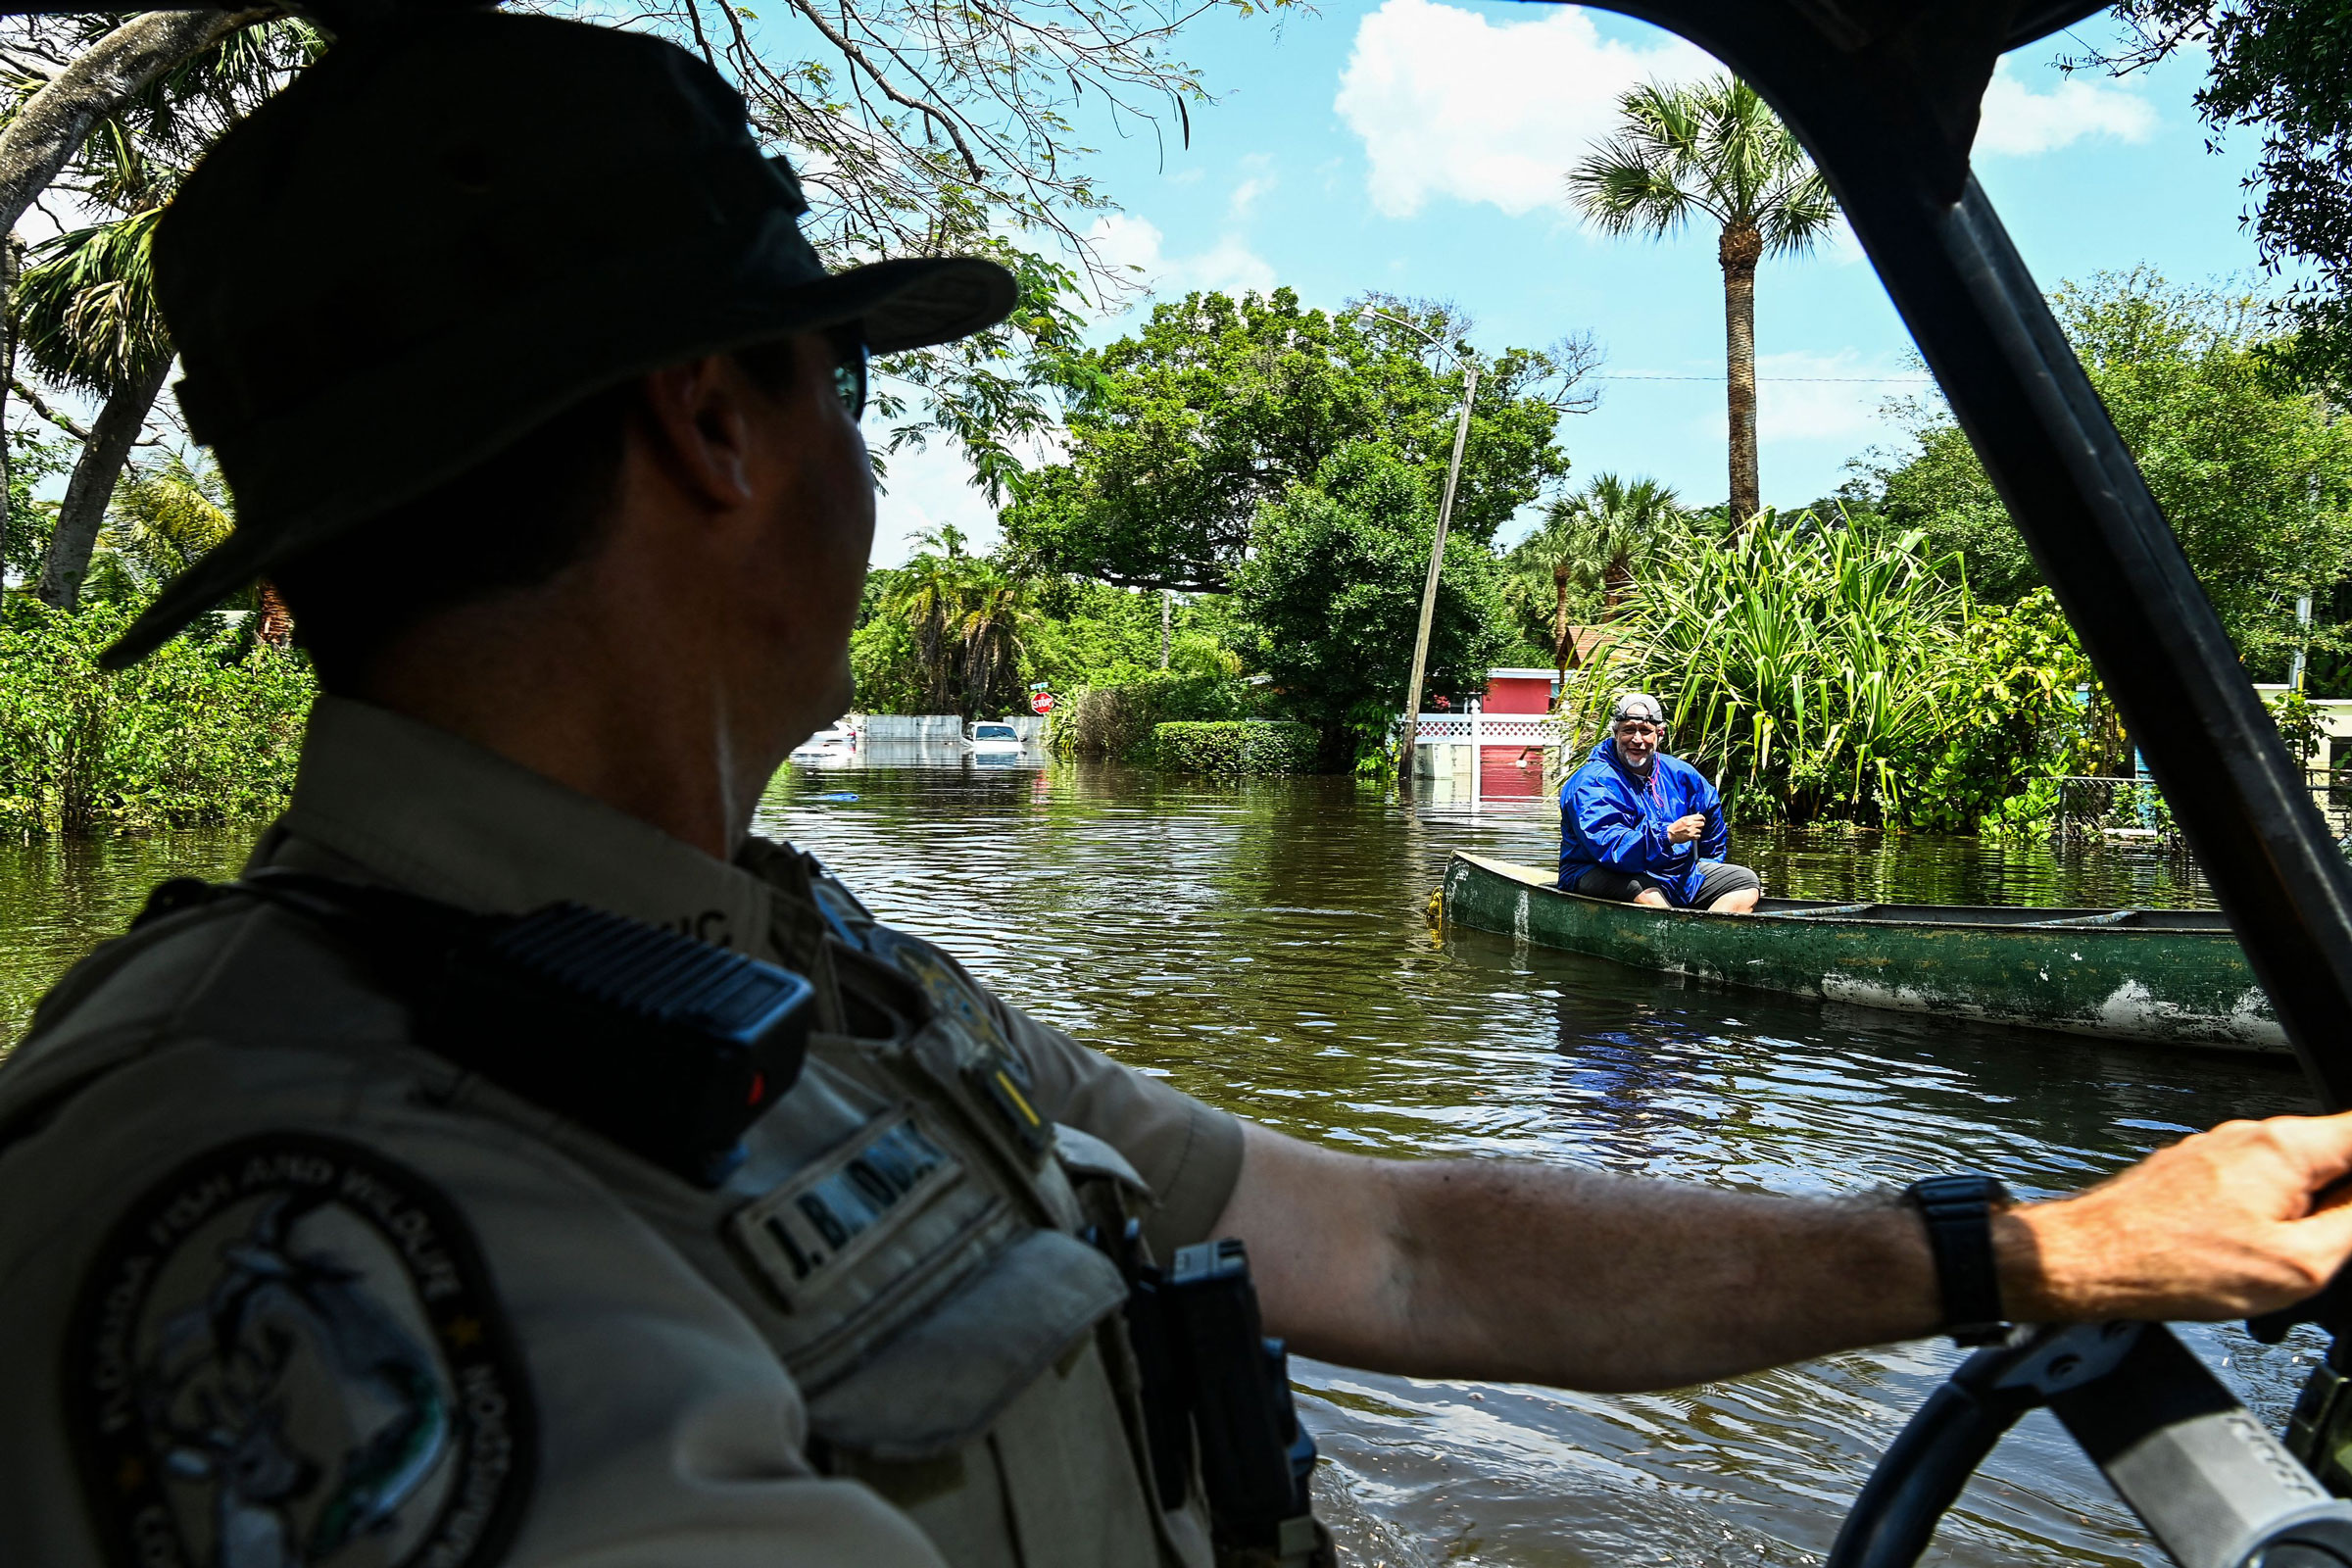 Lieutenant James Brodbeck of Florida Fish and Wildlife Conservation law enforcement patrols through the flooded neighborhood after heavy rain in Fort Lauderdale, Fla., on April 13, 2023. (Chandan Khanna—AFP/Getty Images)